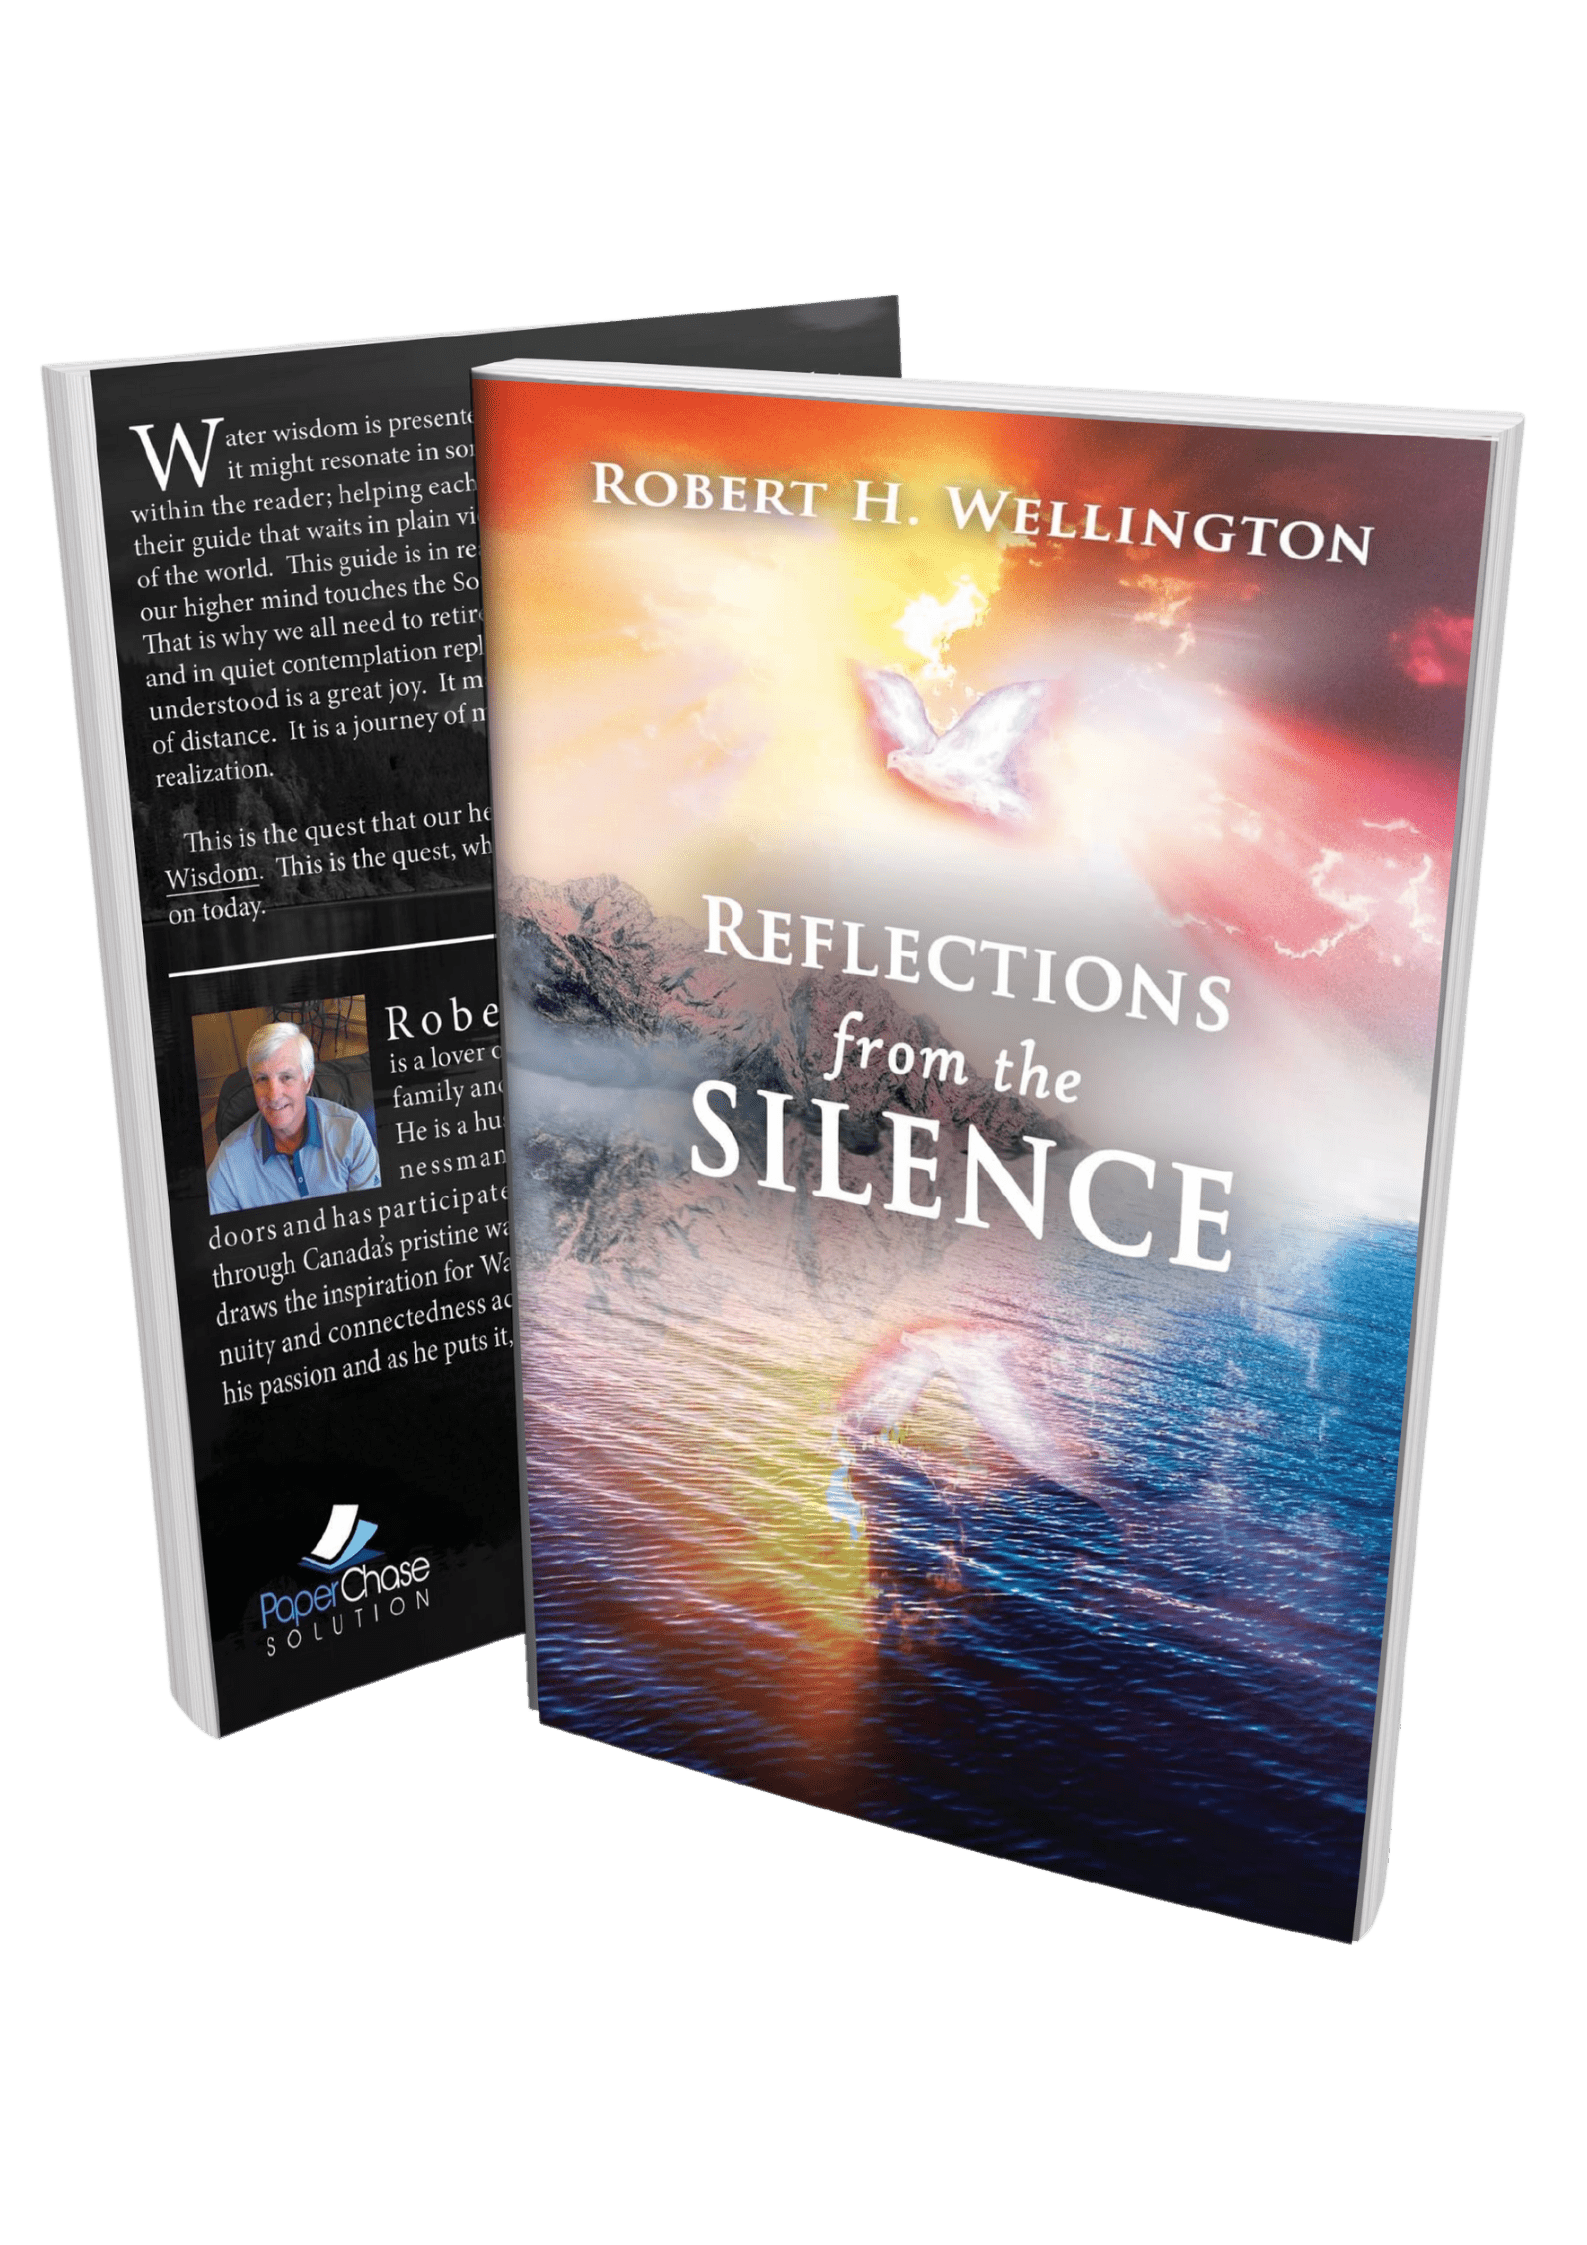 Reflections from the Silence Robert H wellington (2)